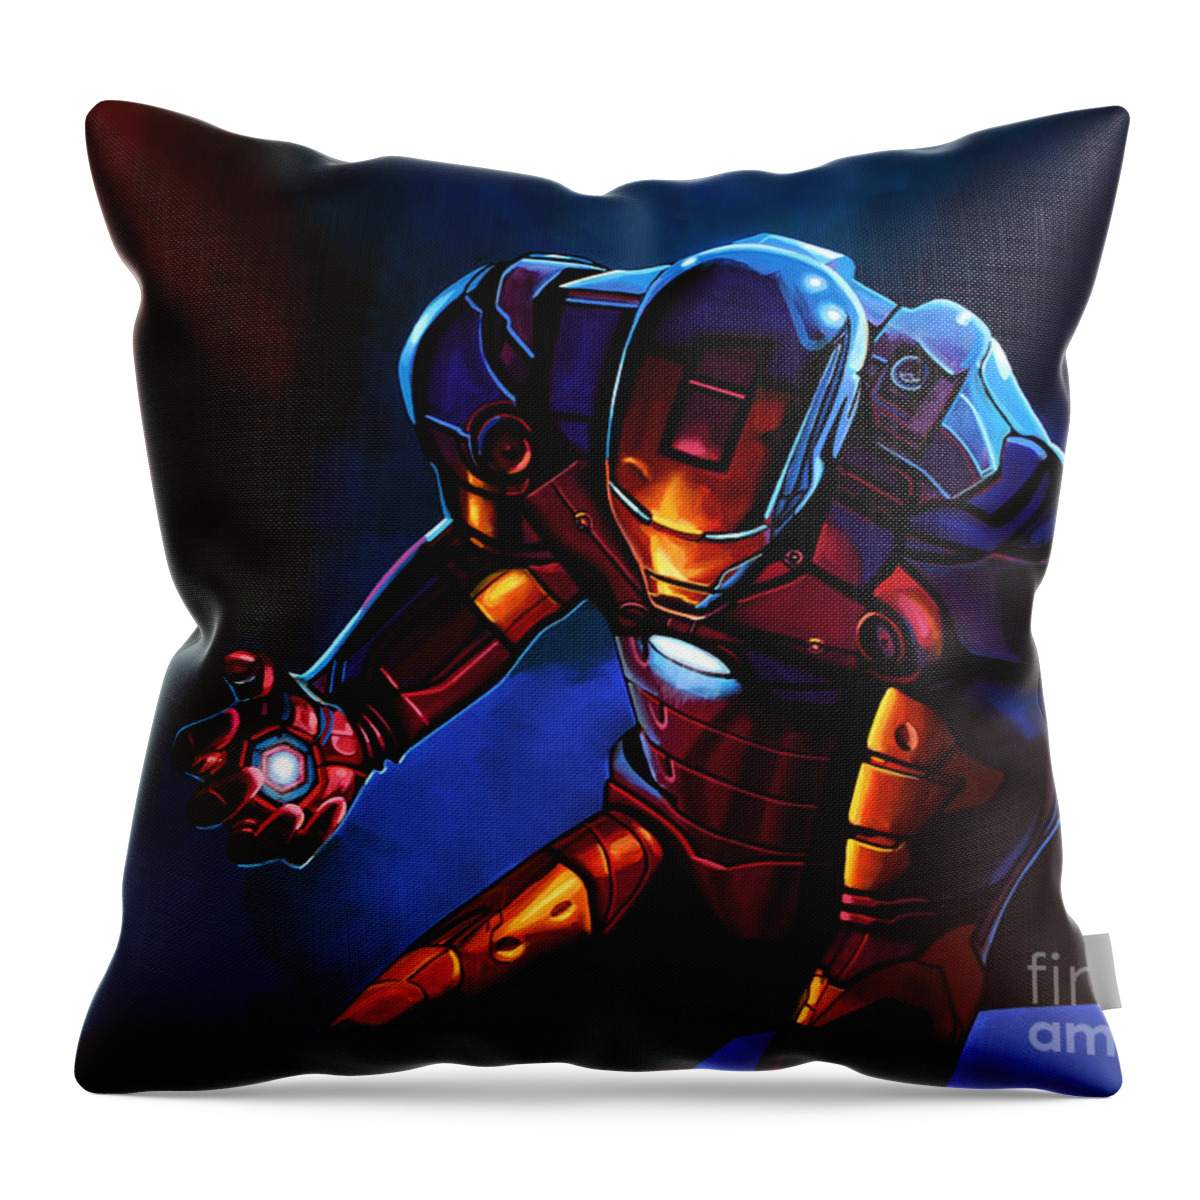 Iron Man Throw Pillow featuring the painting Iron Man by Paul Meijering